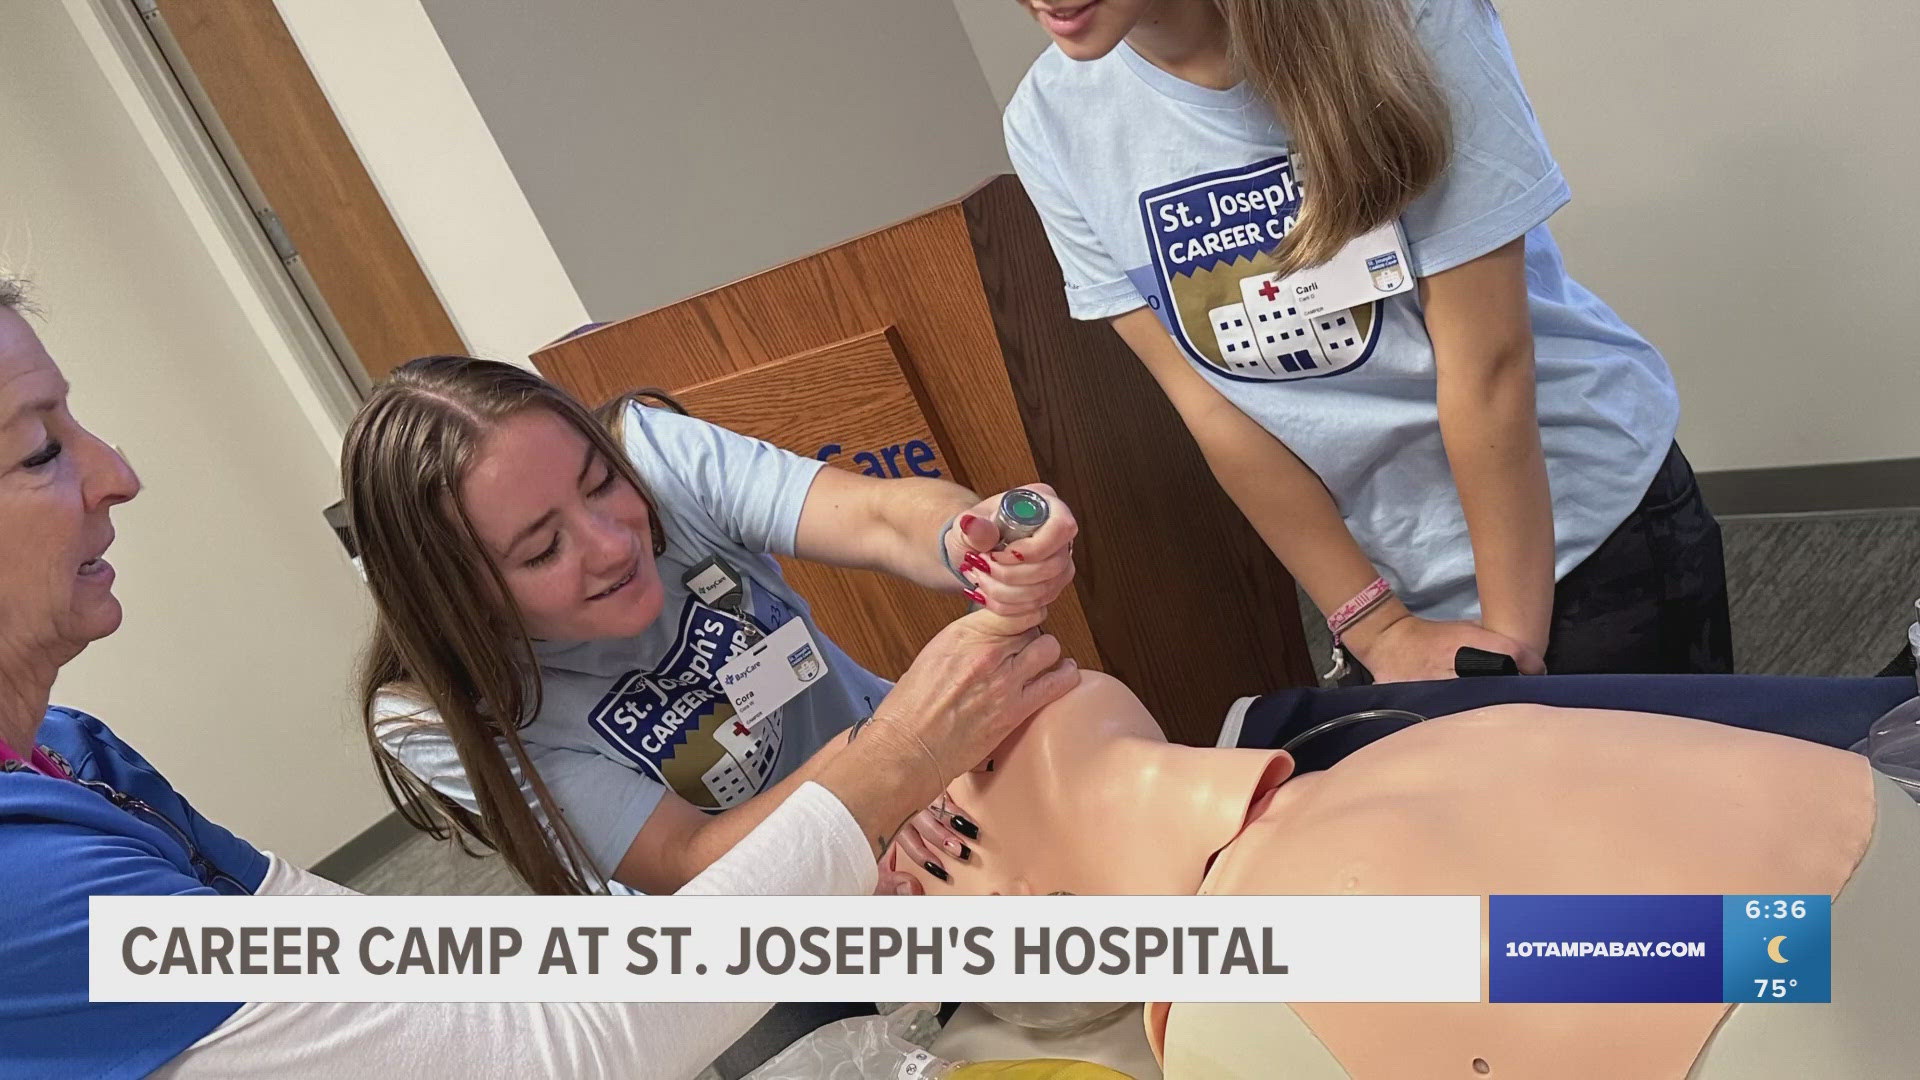 The goal of the career camp is to inspire the next generation of healthcare workers to make sure they have the workforce they need for years to come.